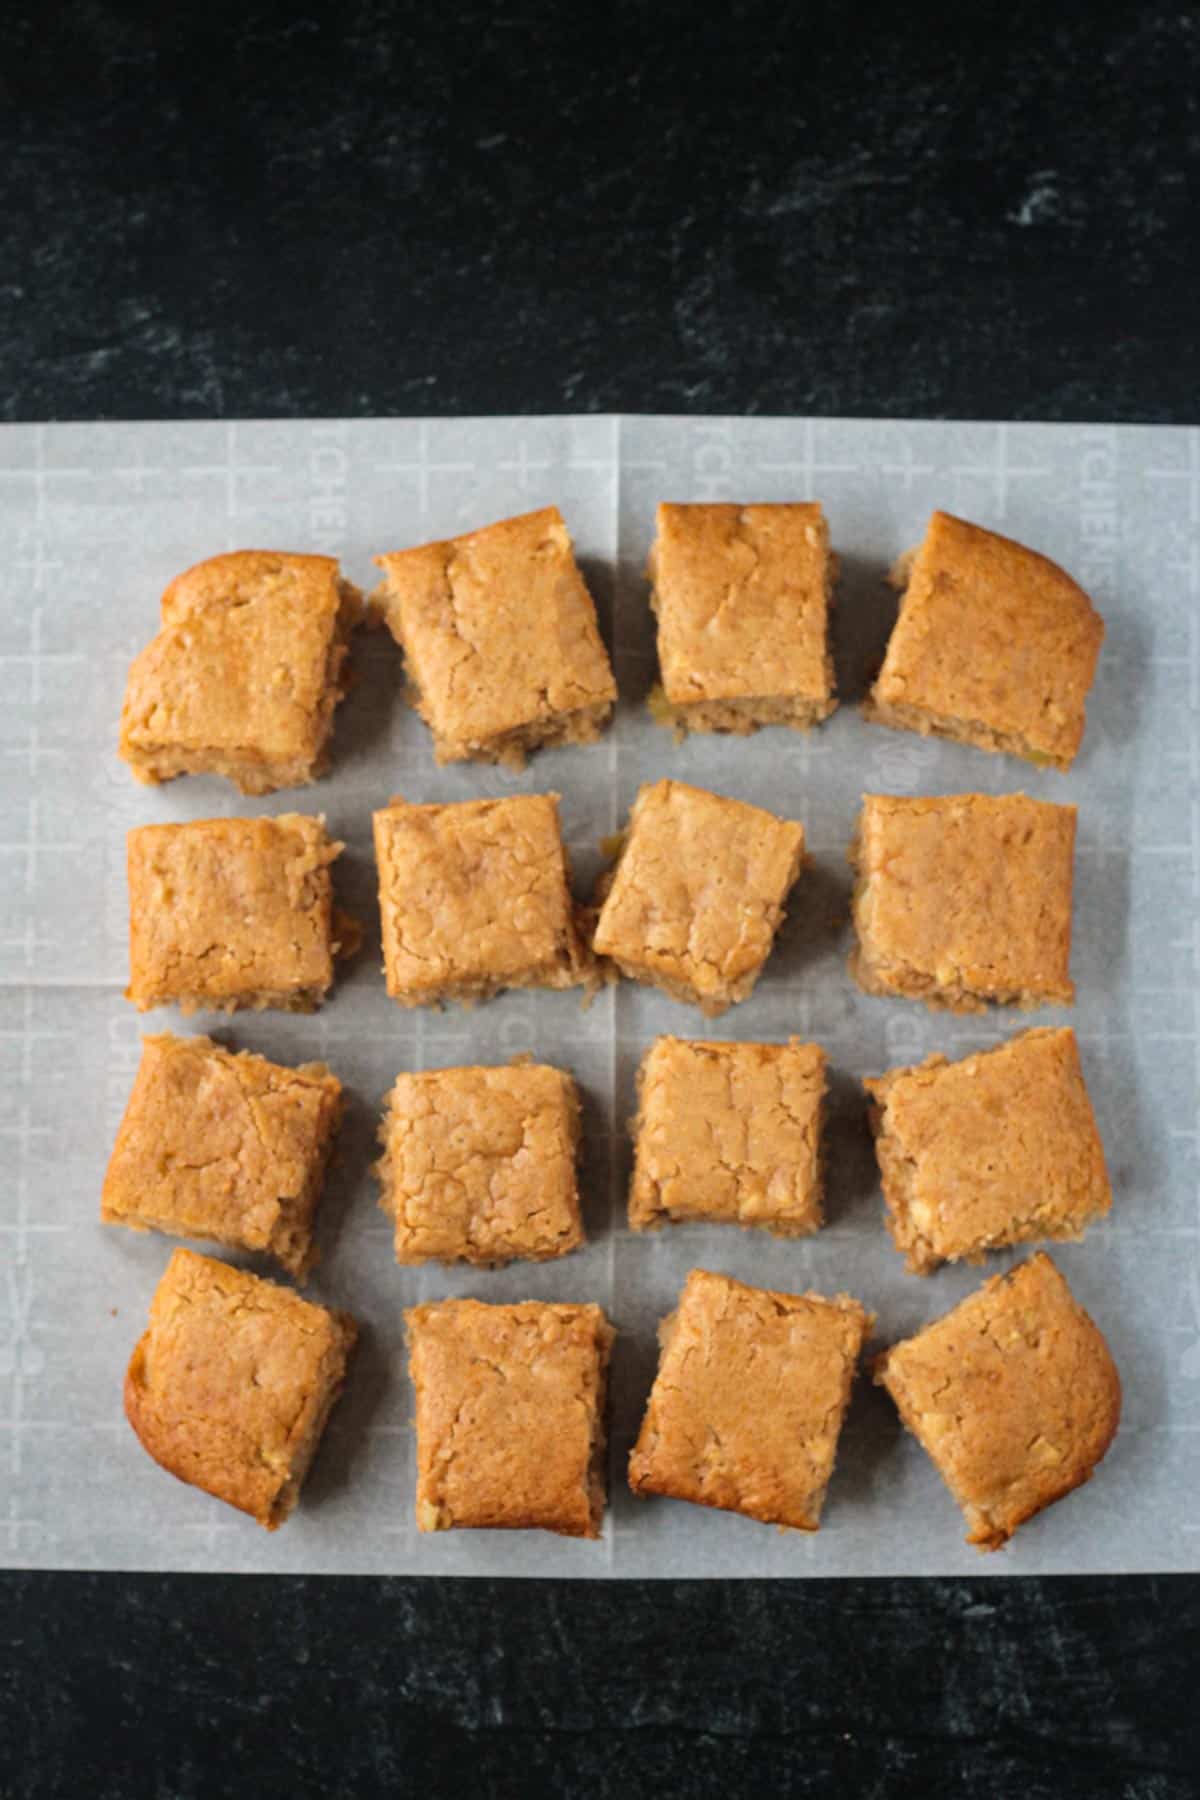 Baked cake cut into 16 equal sized squares.